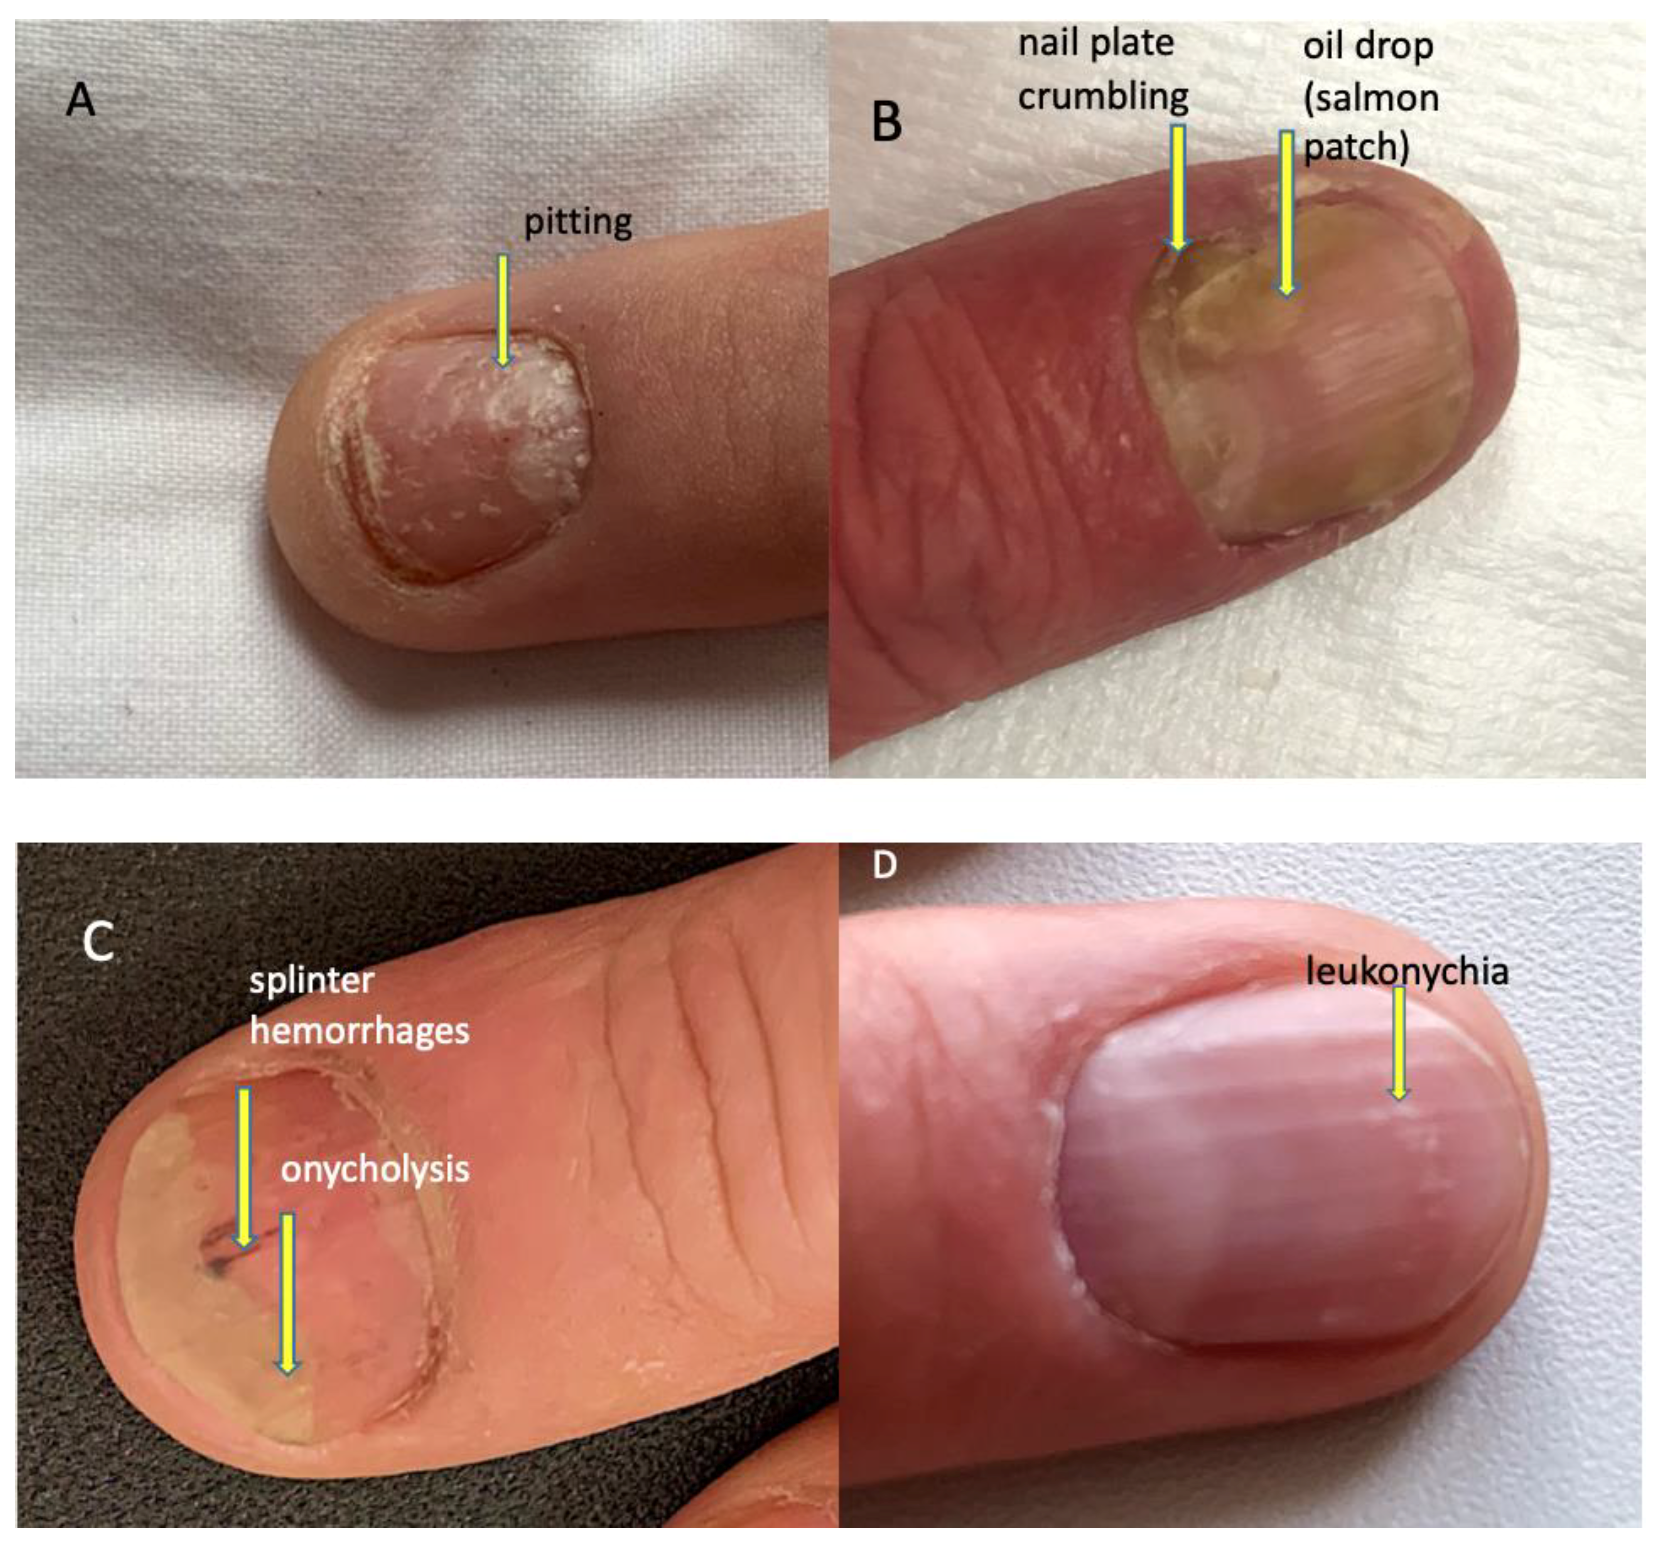 Pulsoca - White Spots On Nails: Should You Be Worried?... | Facebook